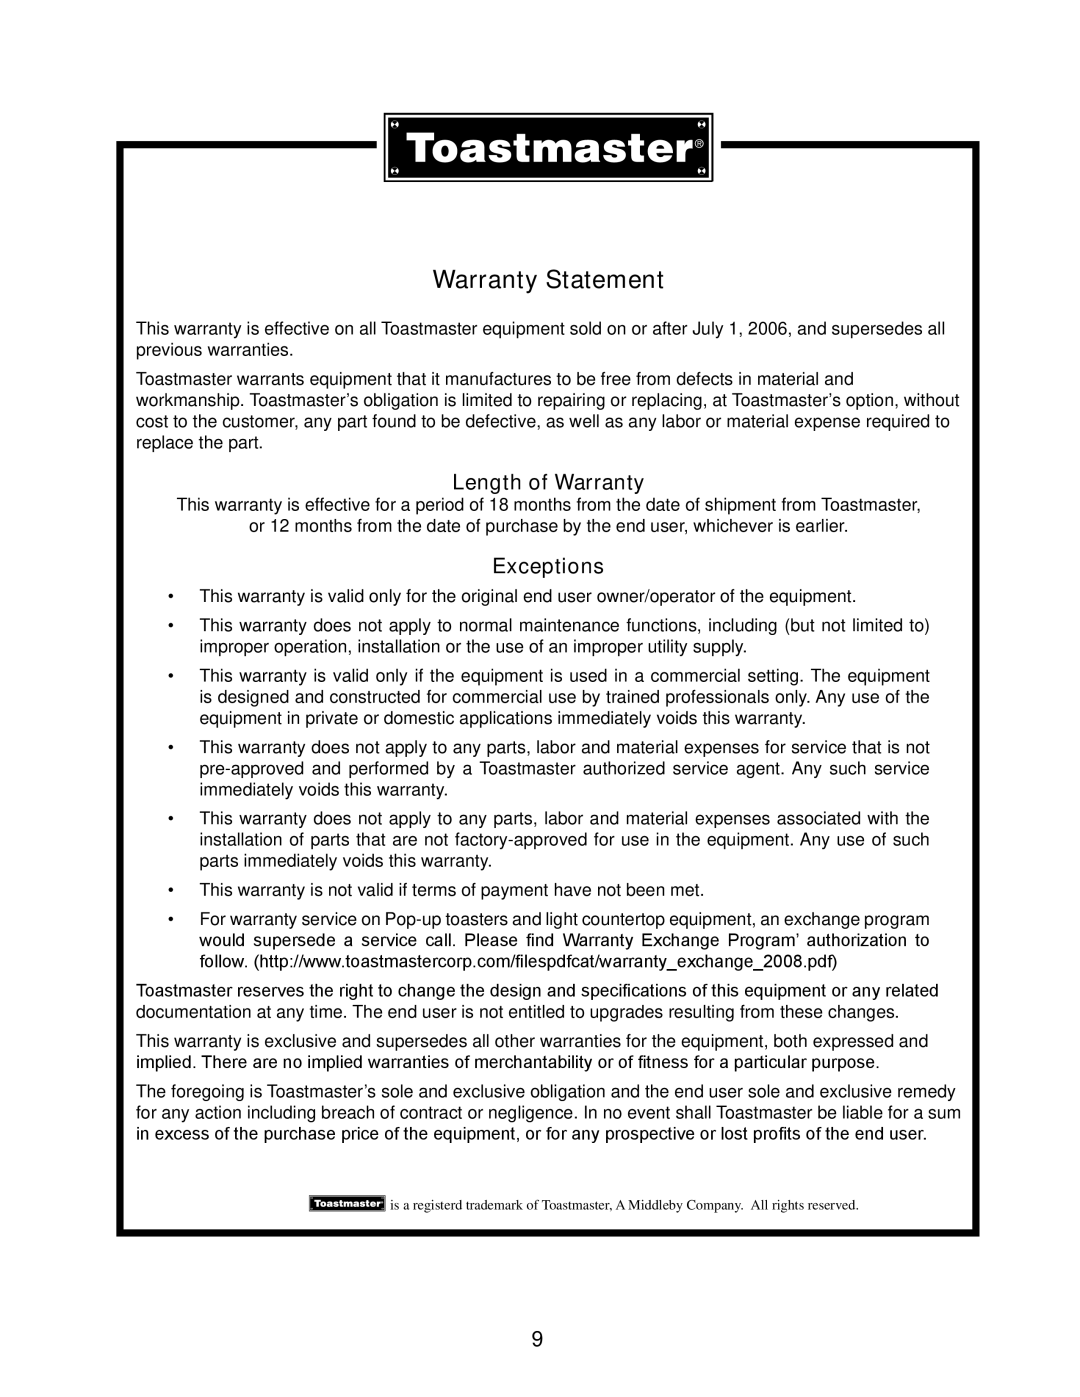 Toastmaster TMHP4, THMP2, TMHP6 manual Warranty Statement, Length of Warranty, Exceptions 